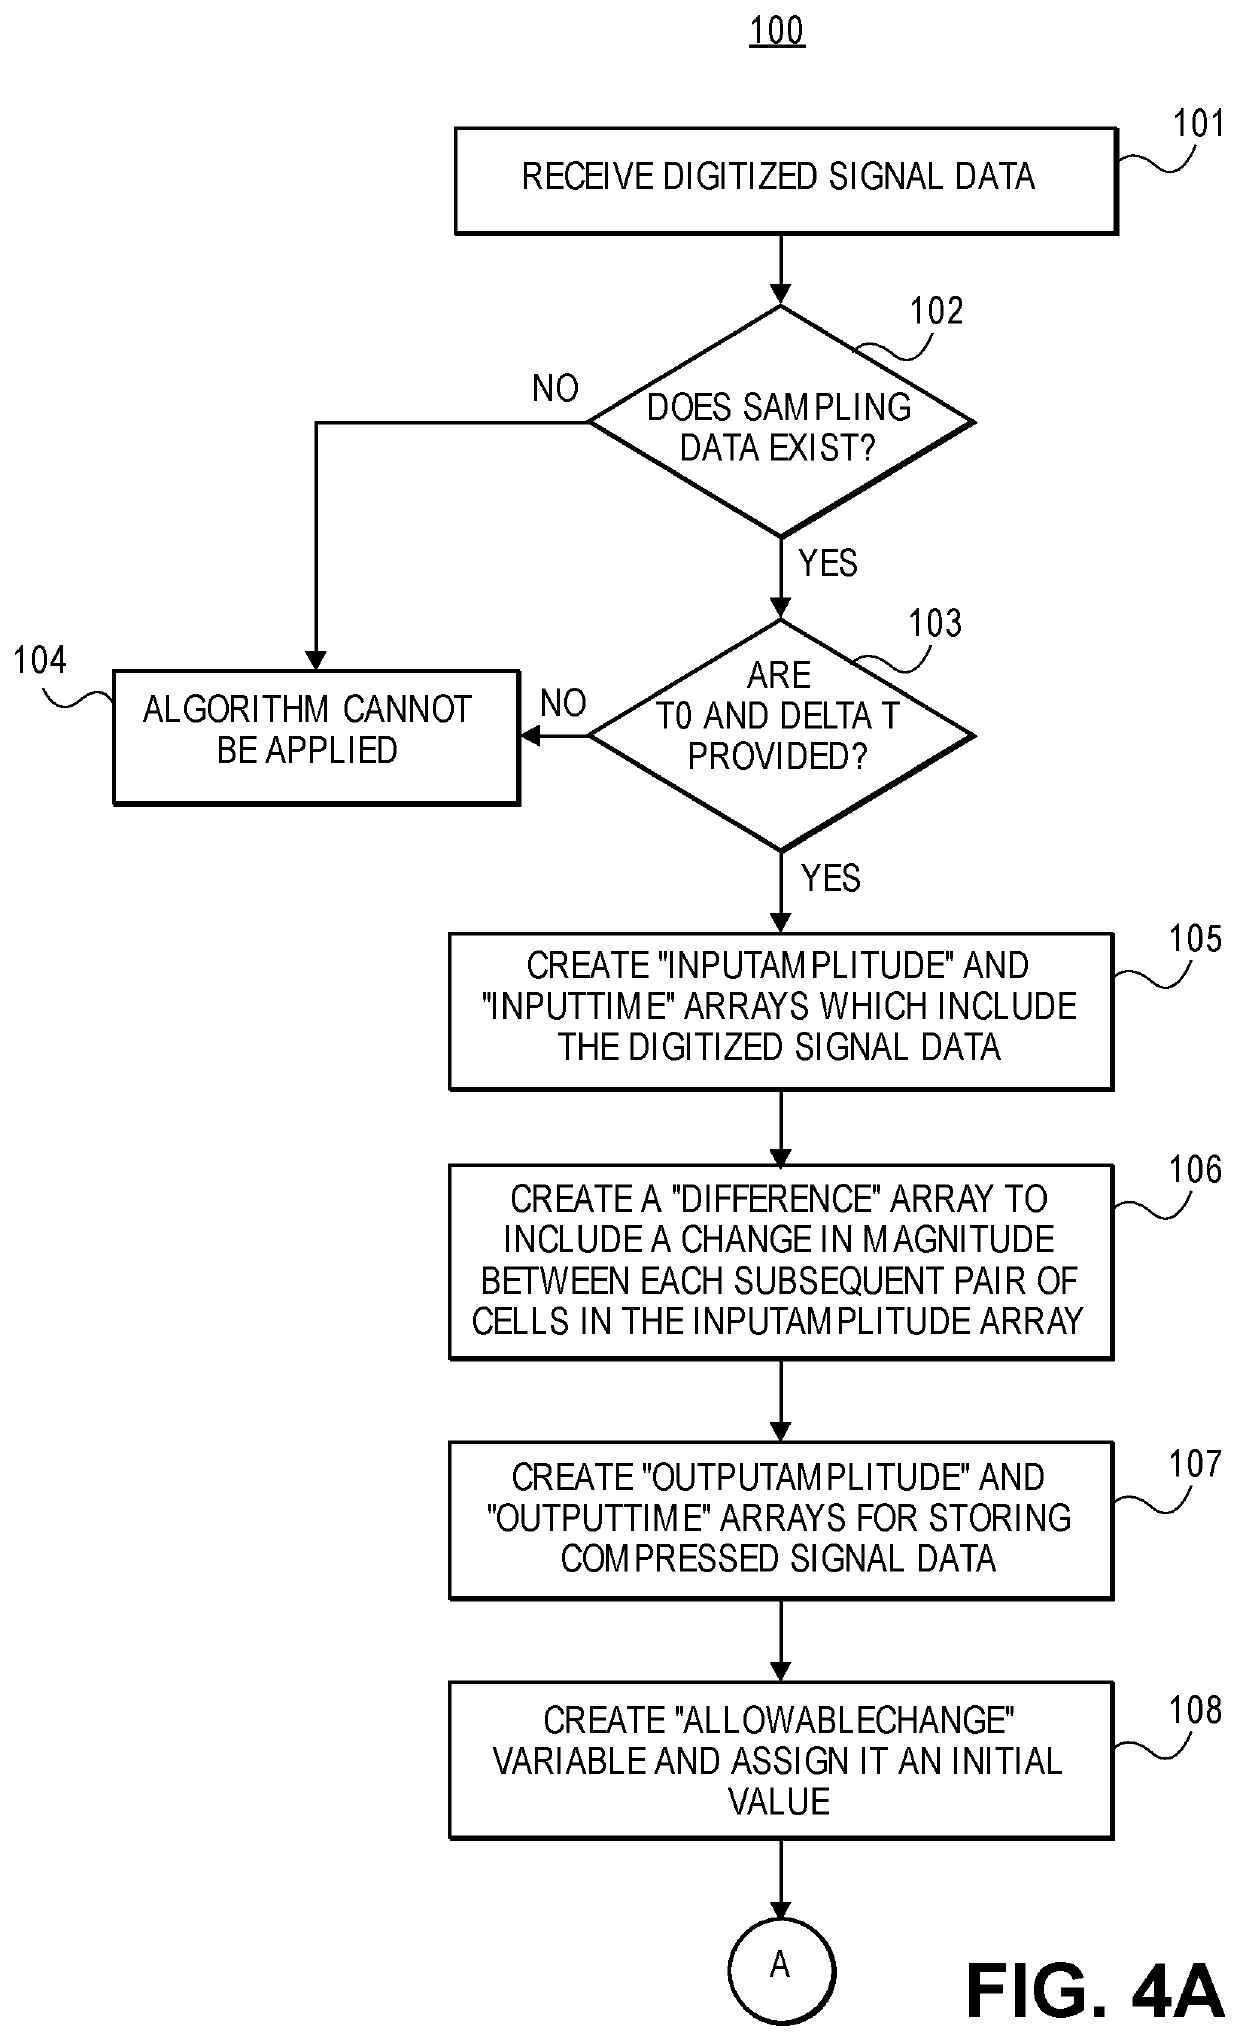 Electronic device and method for compressing sampled data